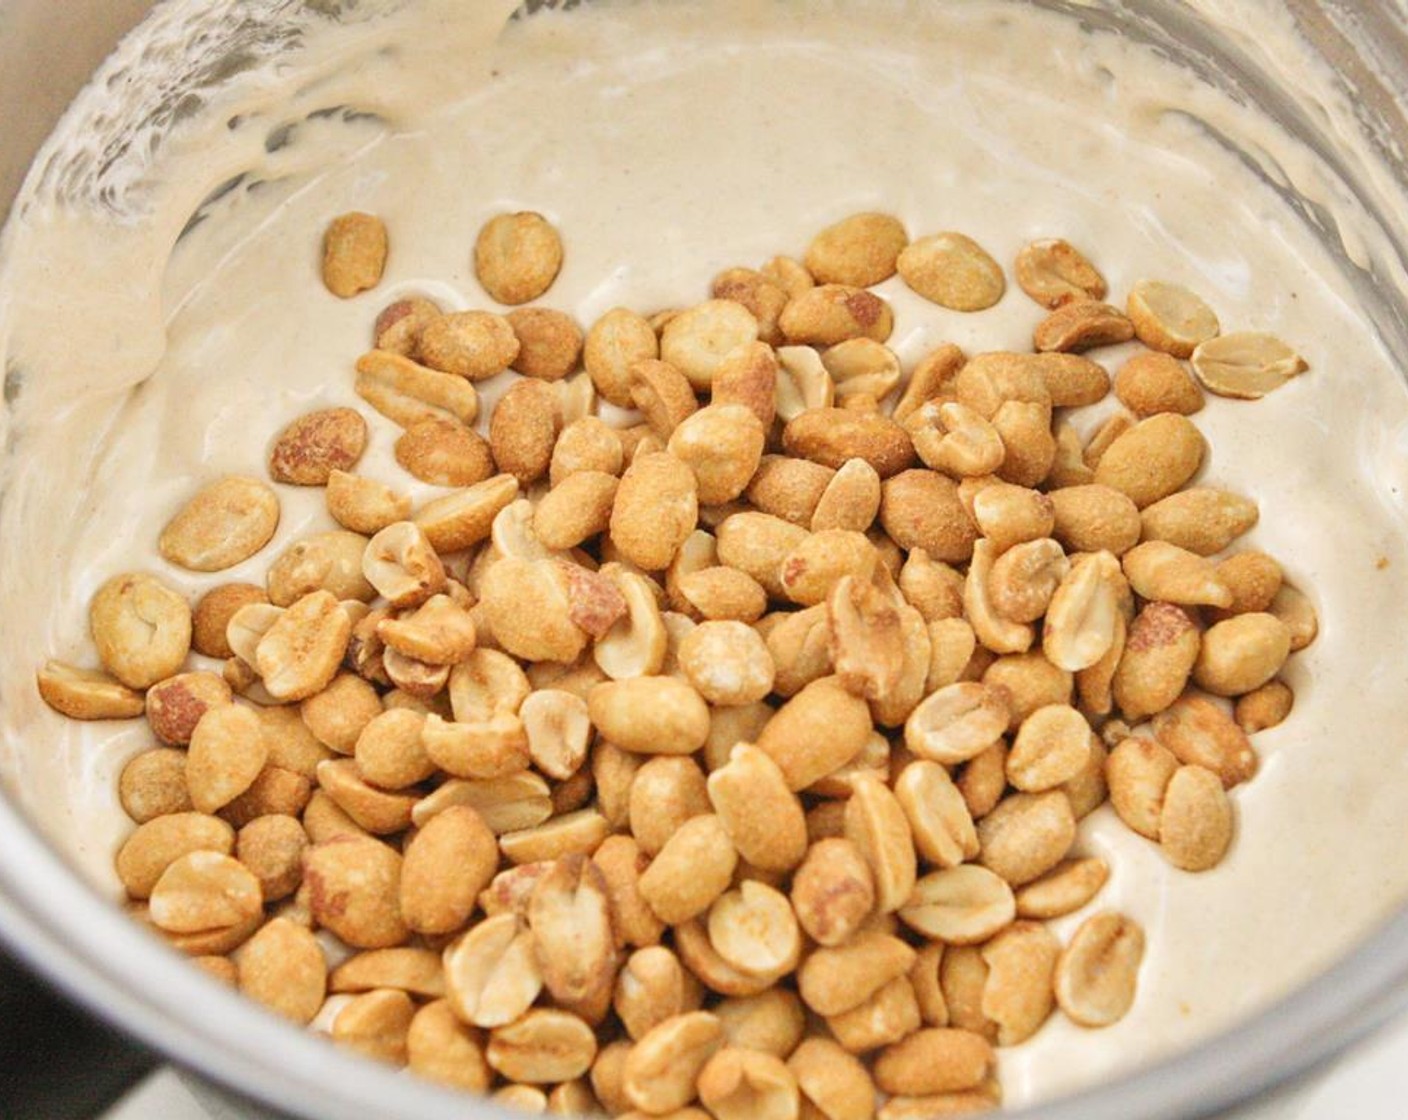 step 8 Add Salted Peanuts (1 cup) and stir until incorporated. Pour mixture over the chocolate layer from the freezer and spread evenly. Place back in freezer.